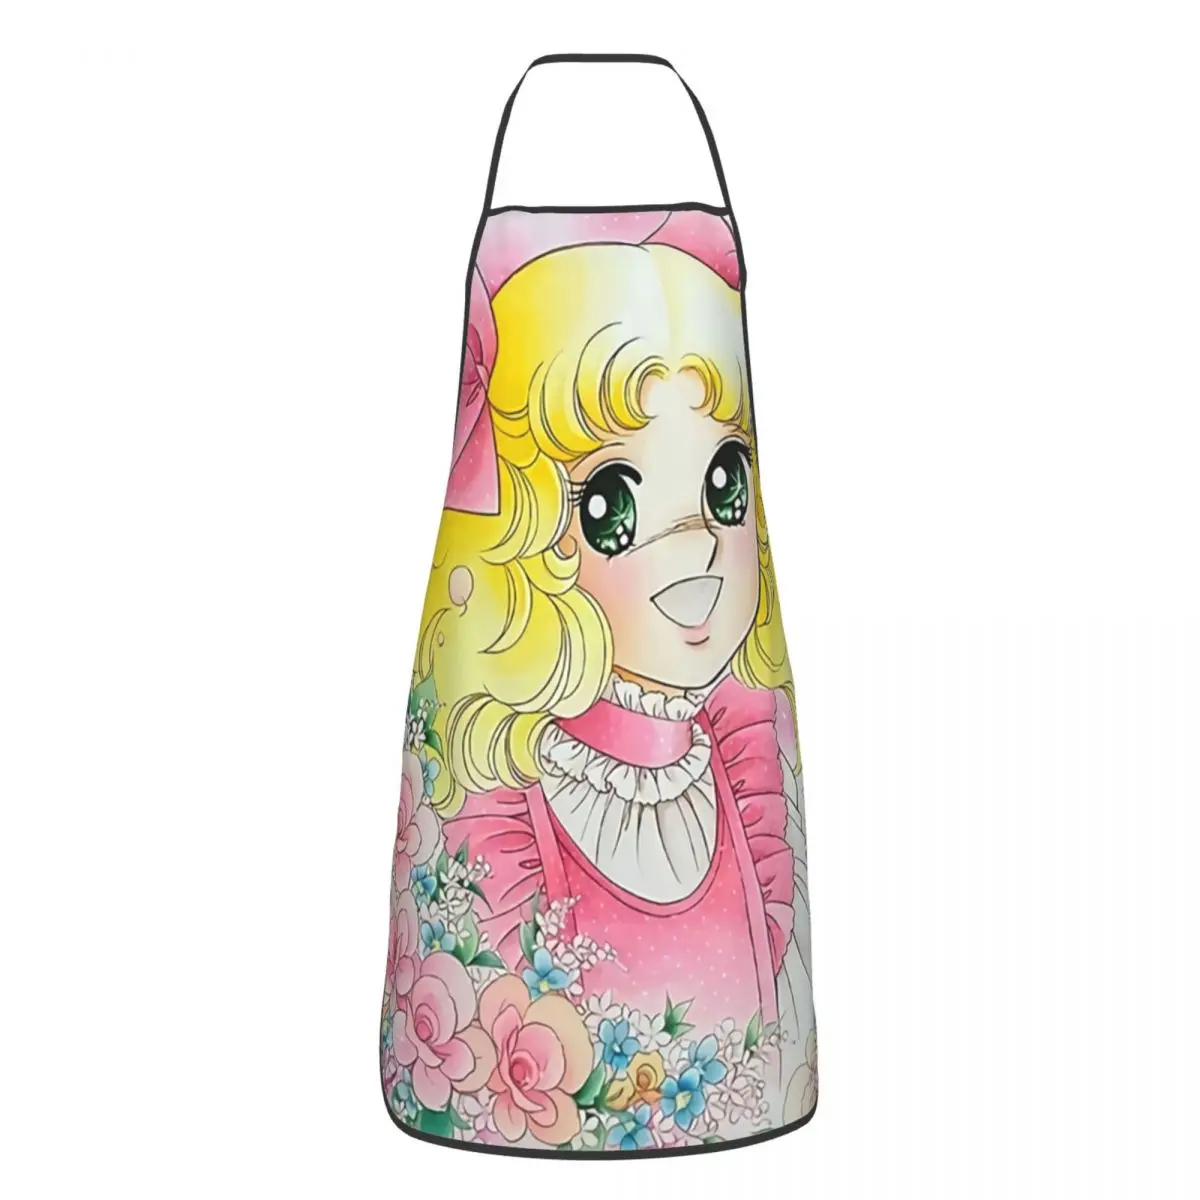 

Candy Candy Anime Apron Unisex Antifouling Garden Bib Kawaii Cute White Adley Cuisine Cooking Baking Household Cleaning Pinafore